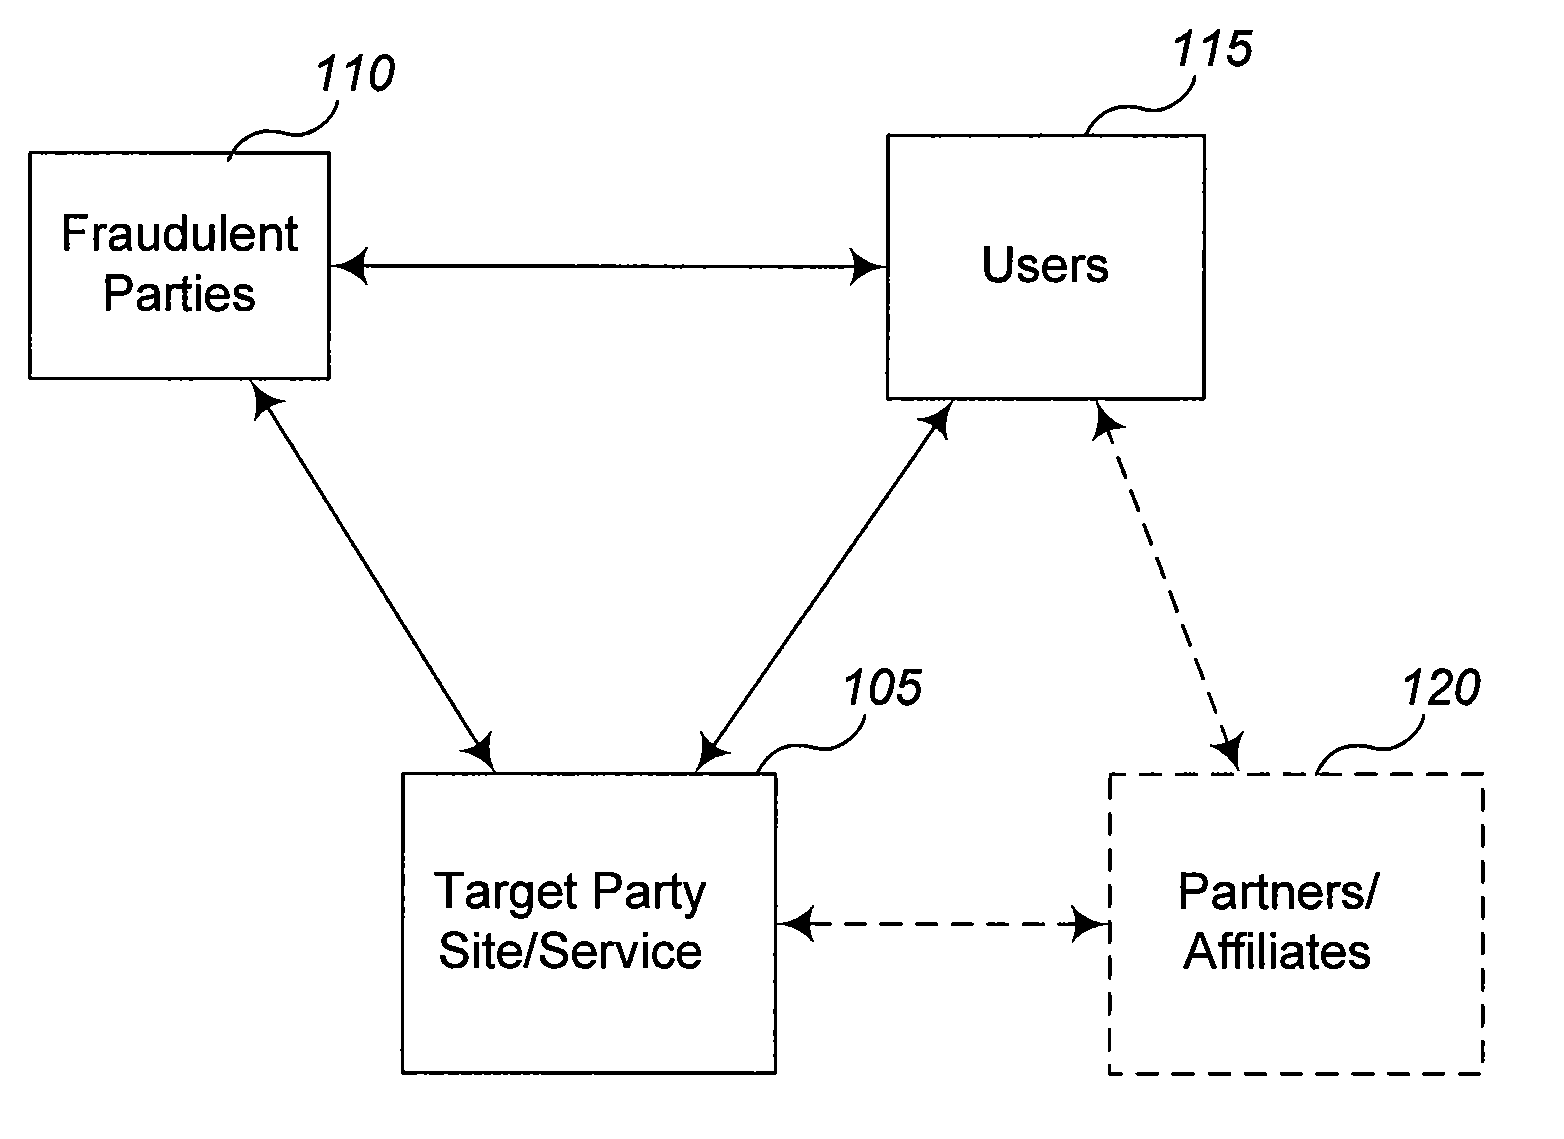 Detecting fraudulent activity by analysis of information requests